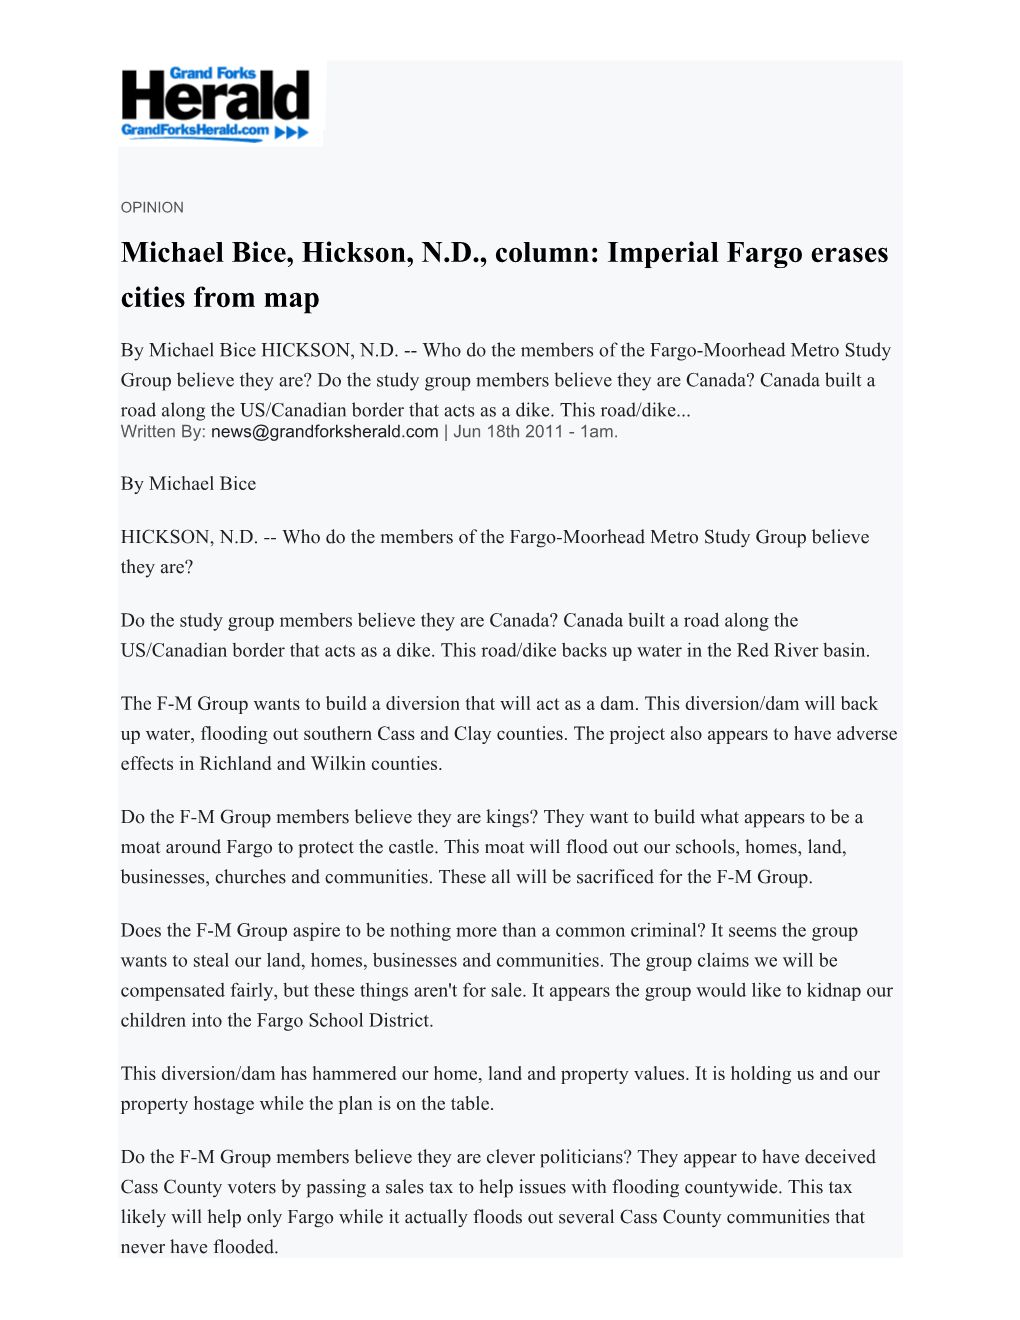 Michael Bice, Hickson, N.D., Column: Imperial Fargo Erases Cities from Map